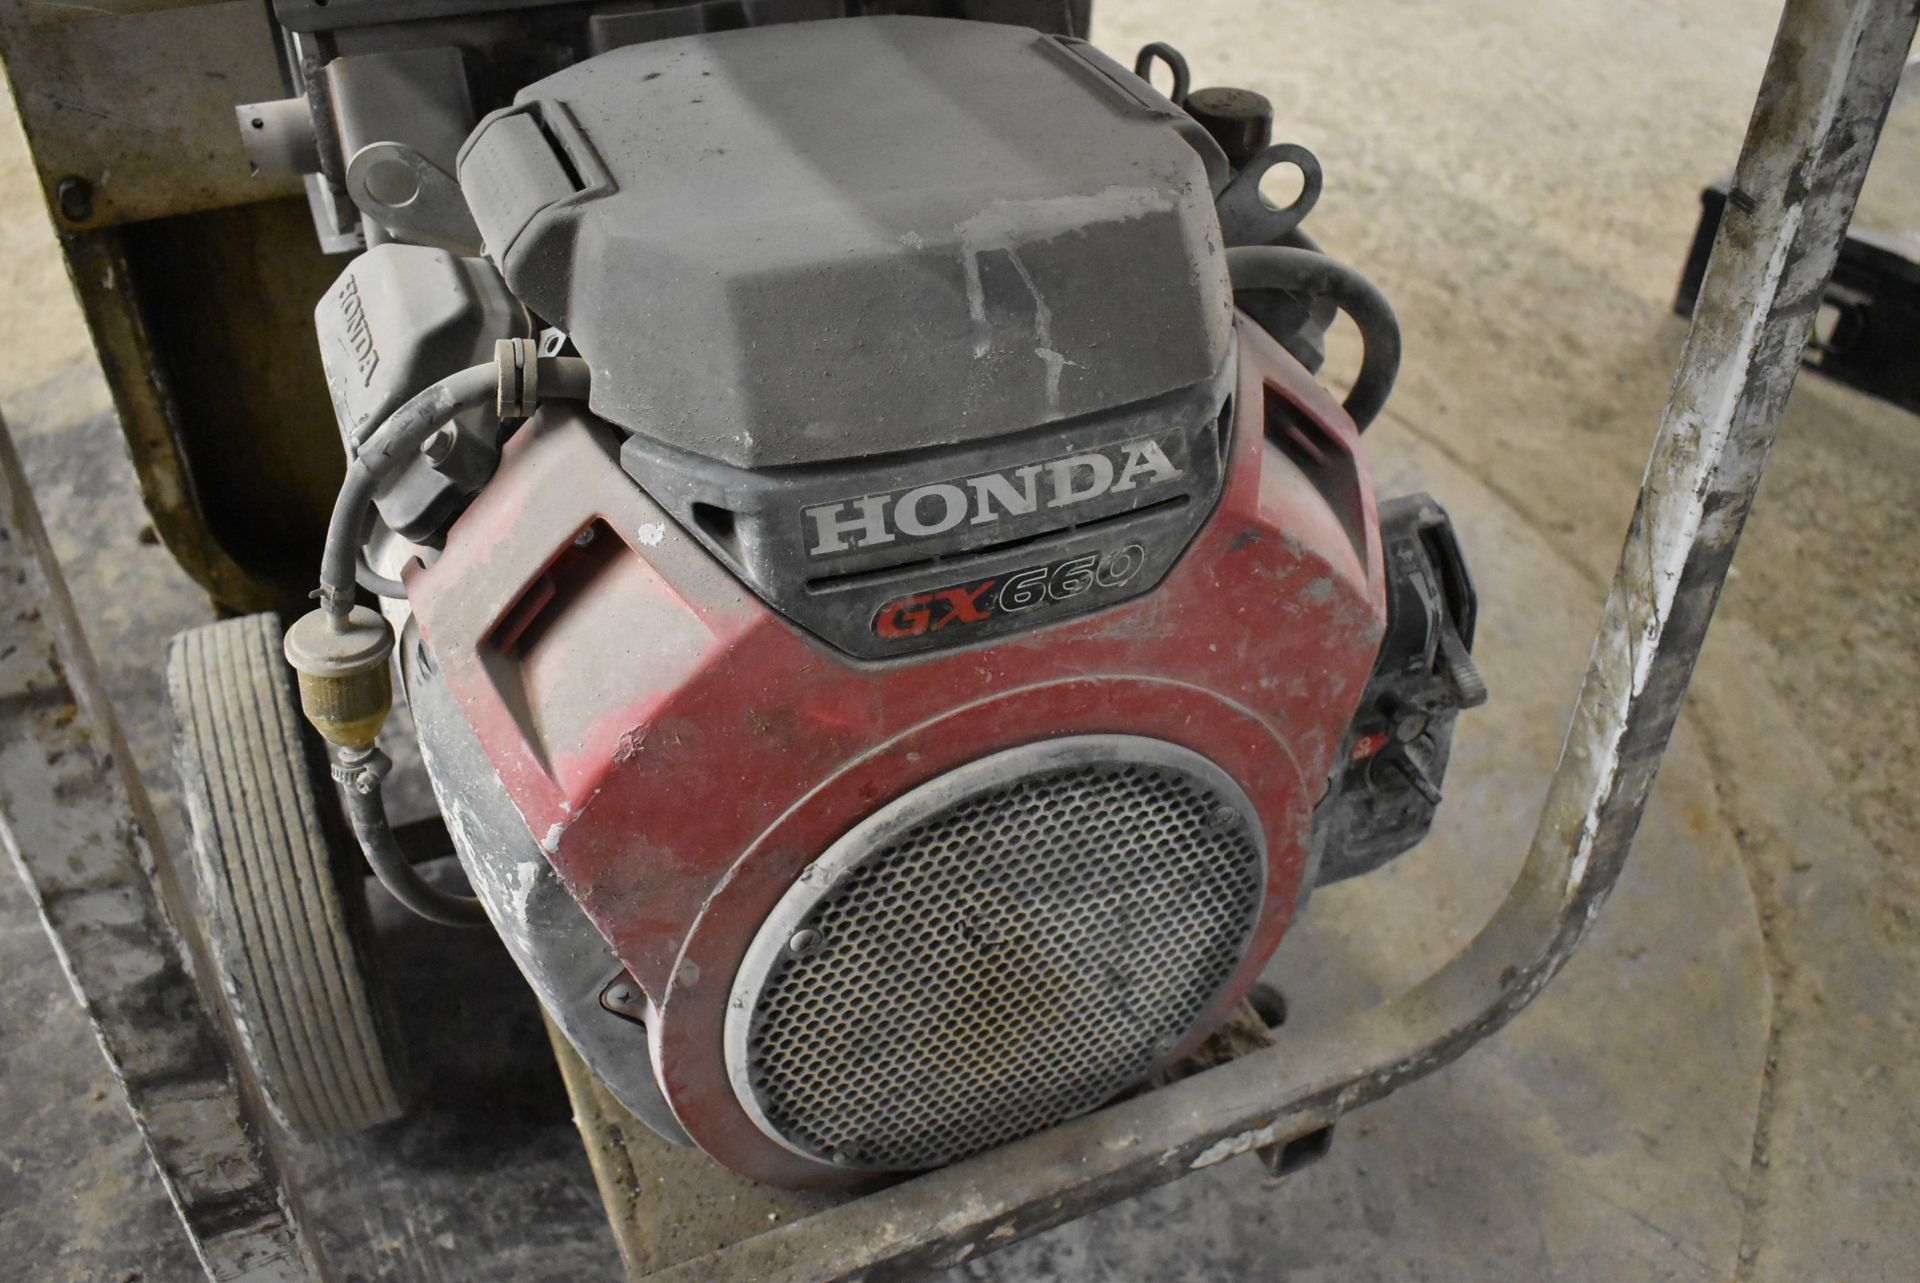 DIAMOND PRODUCTS CORE BORE CB21 PORTABLE HYDRAULIC POWER UNIT WITH HONDA GX660 GASOLINE ENGINE, S/N: - Image 5 of 6